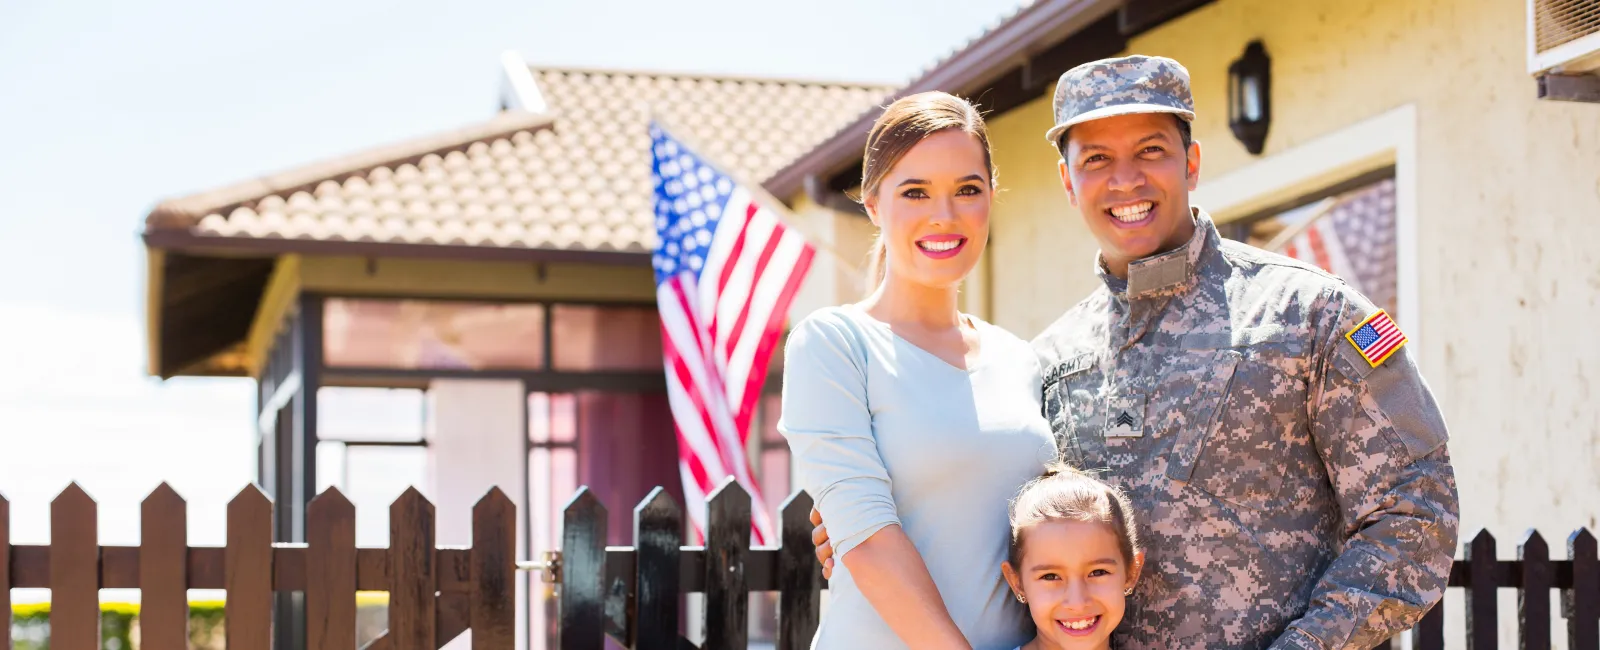 a family standing in front of a fence and a flag